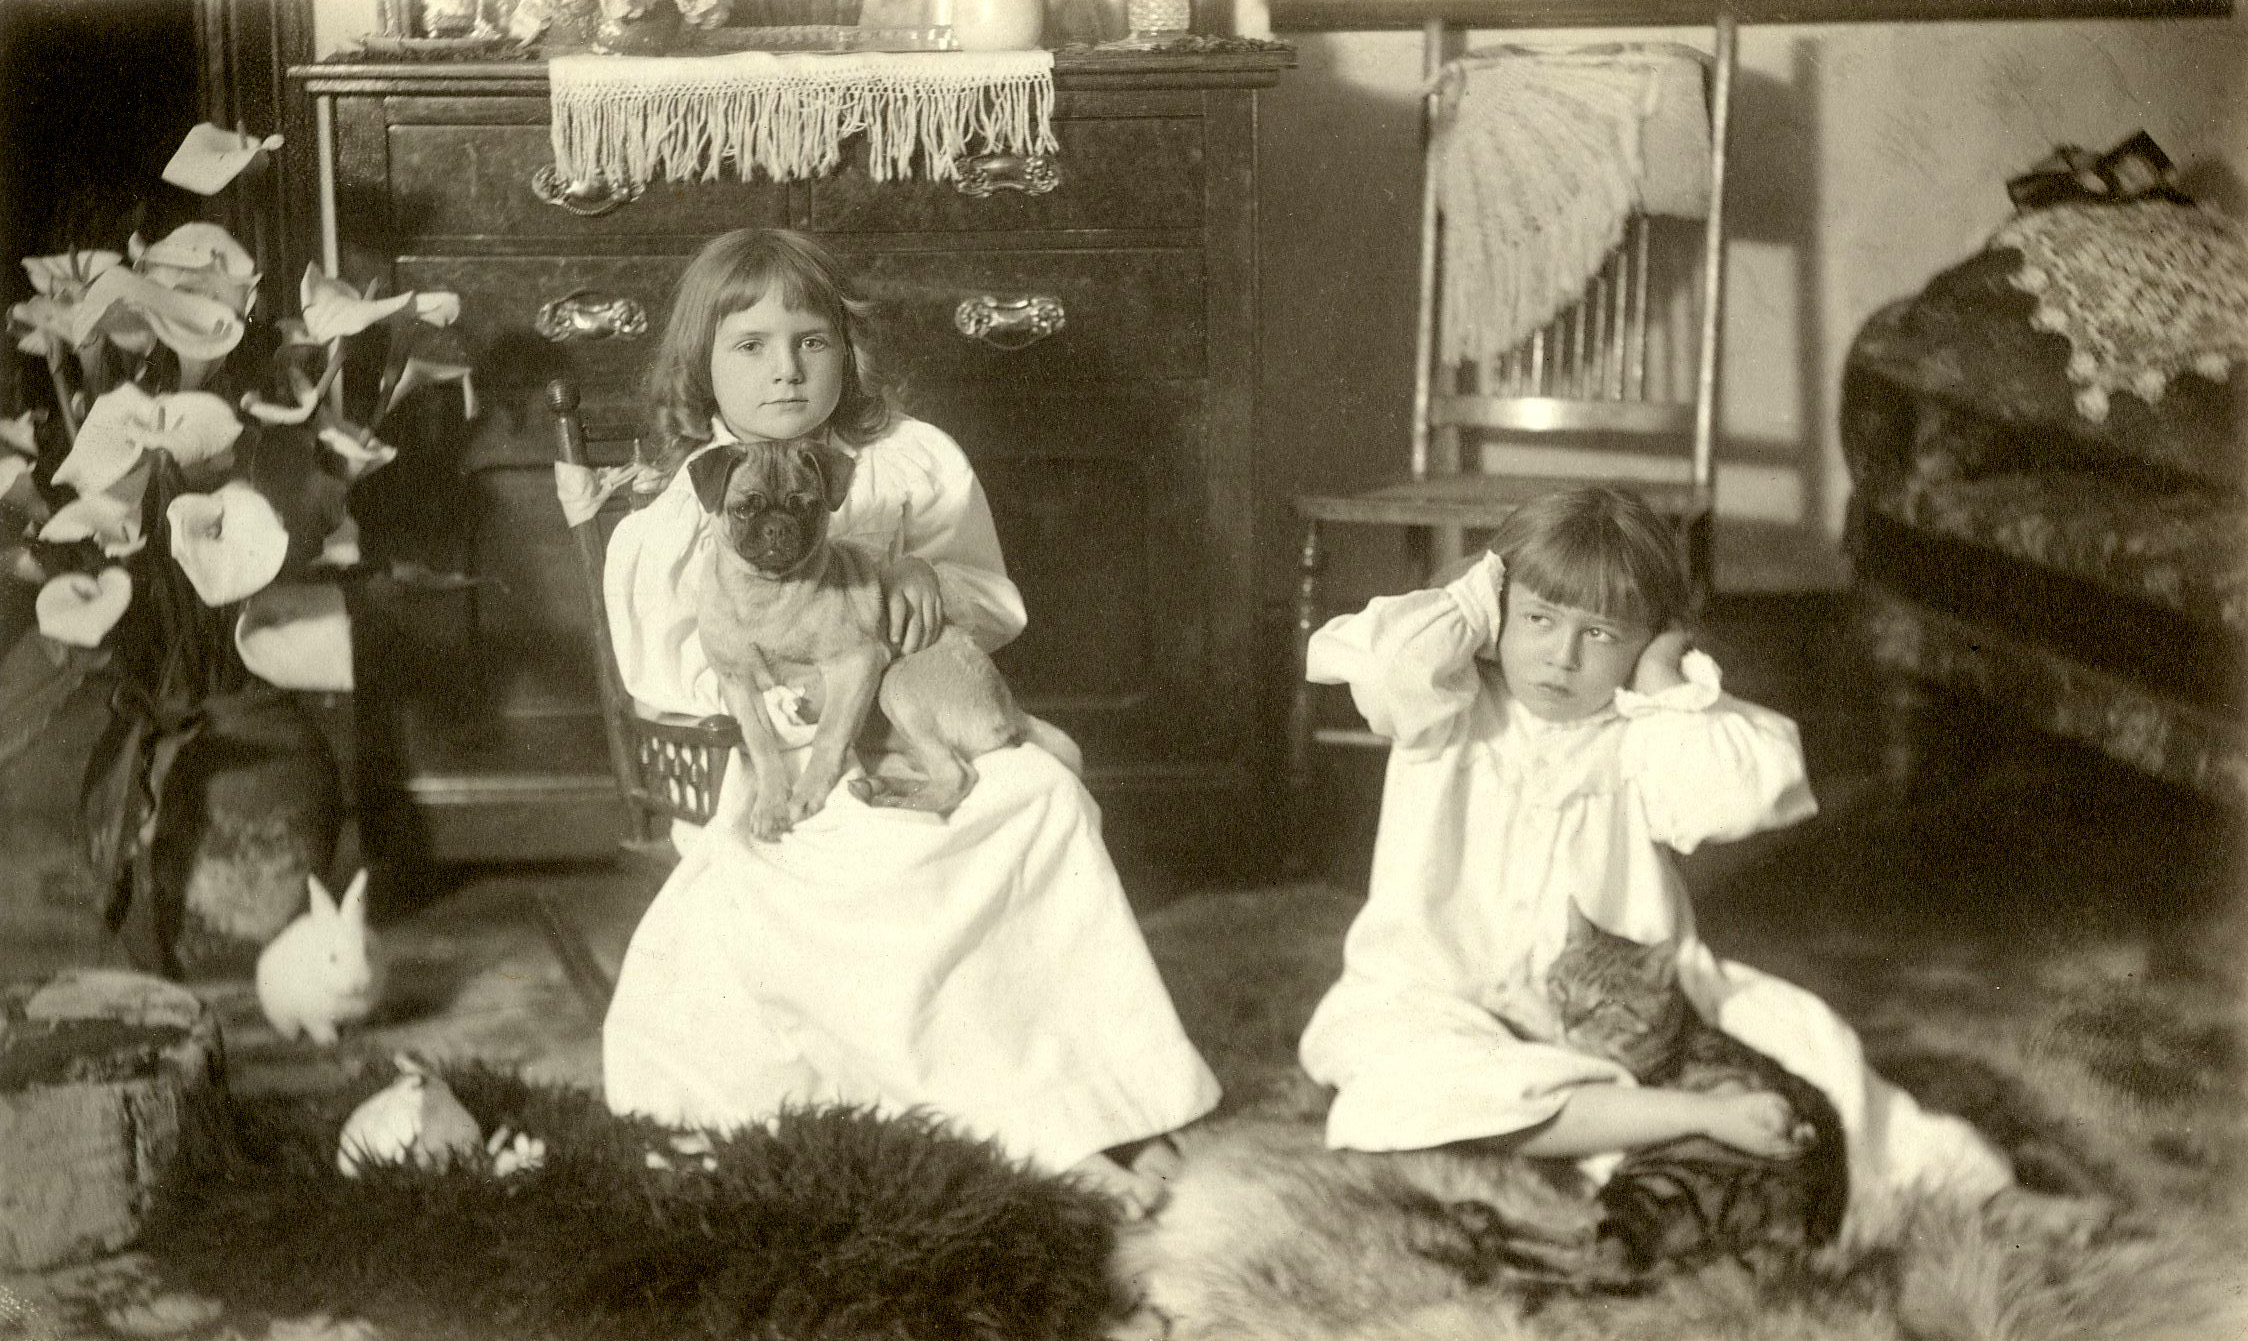 Catherine & Augusta Thiele with pets, Auburn, California, c. 1895. View full size.